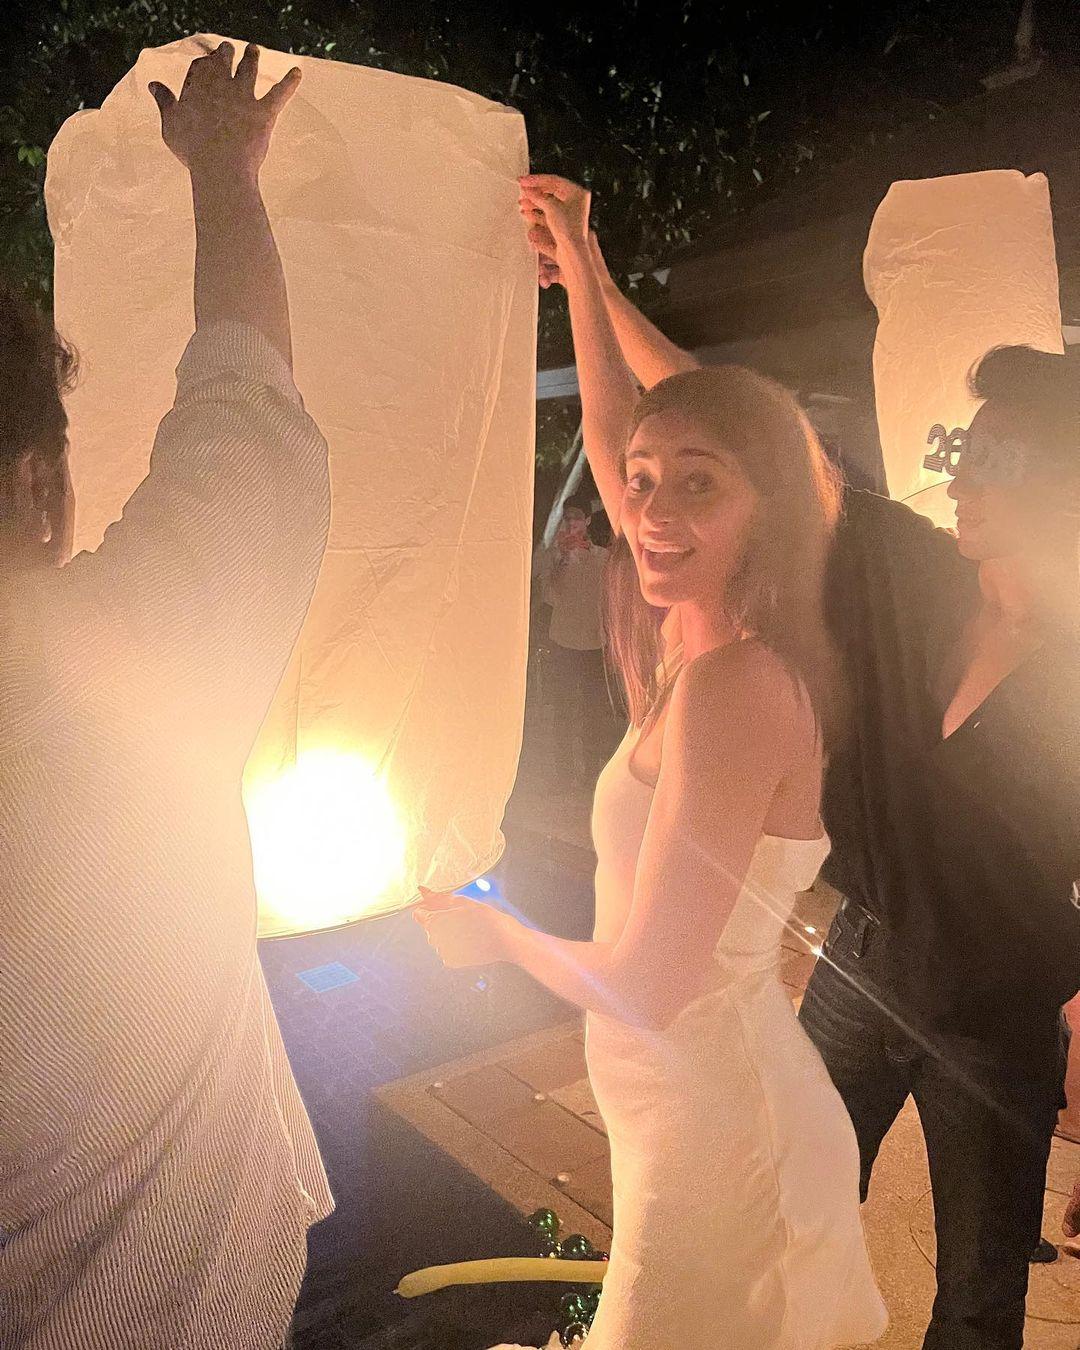 Ananya Panday headed to Thailand this year to celebrate the New year. She headed out to the country days before the New Years and seemed to have a gala time. She shared a picture of herself lighting the Chinese latern, which is customary to fly on New Year's eve